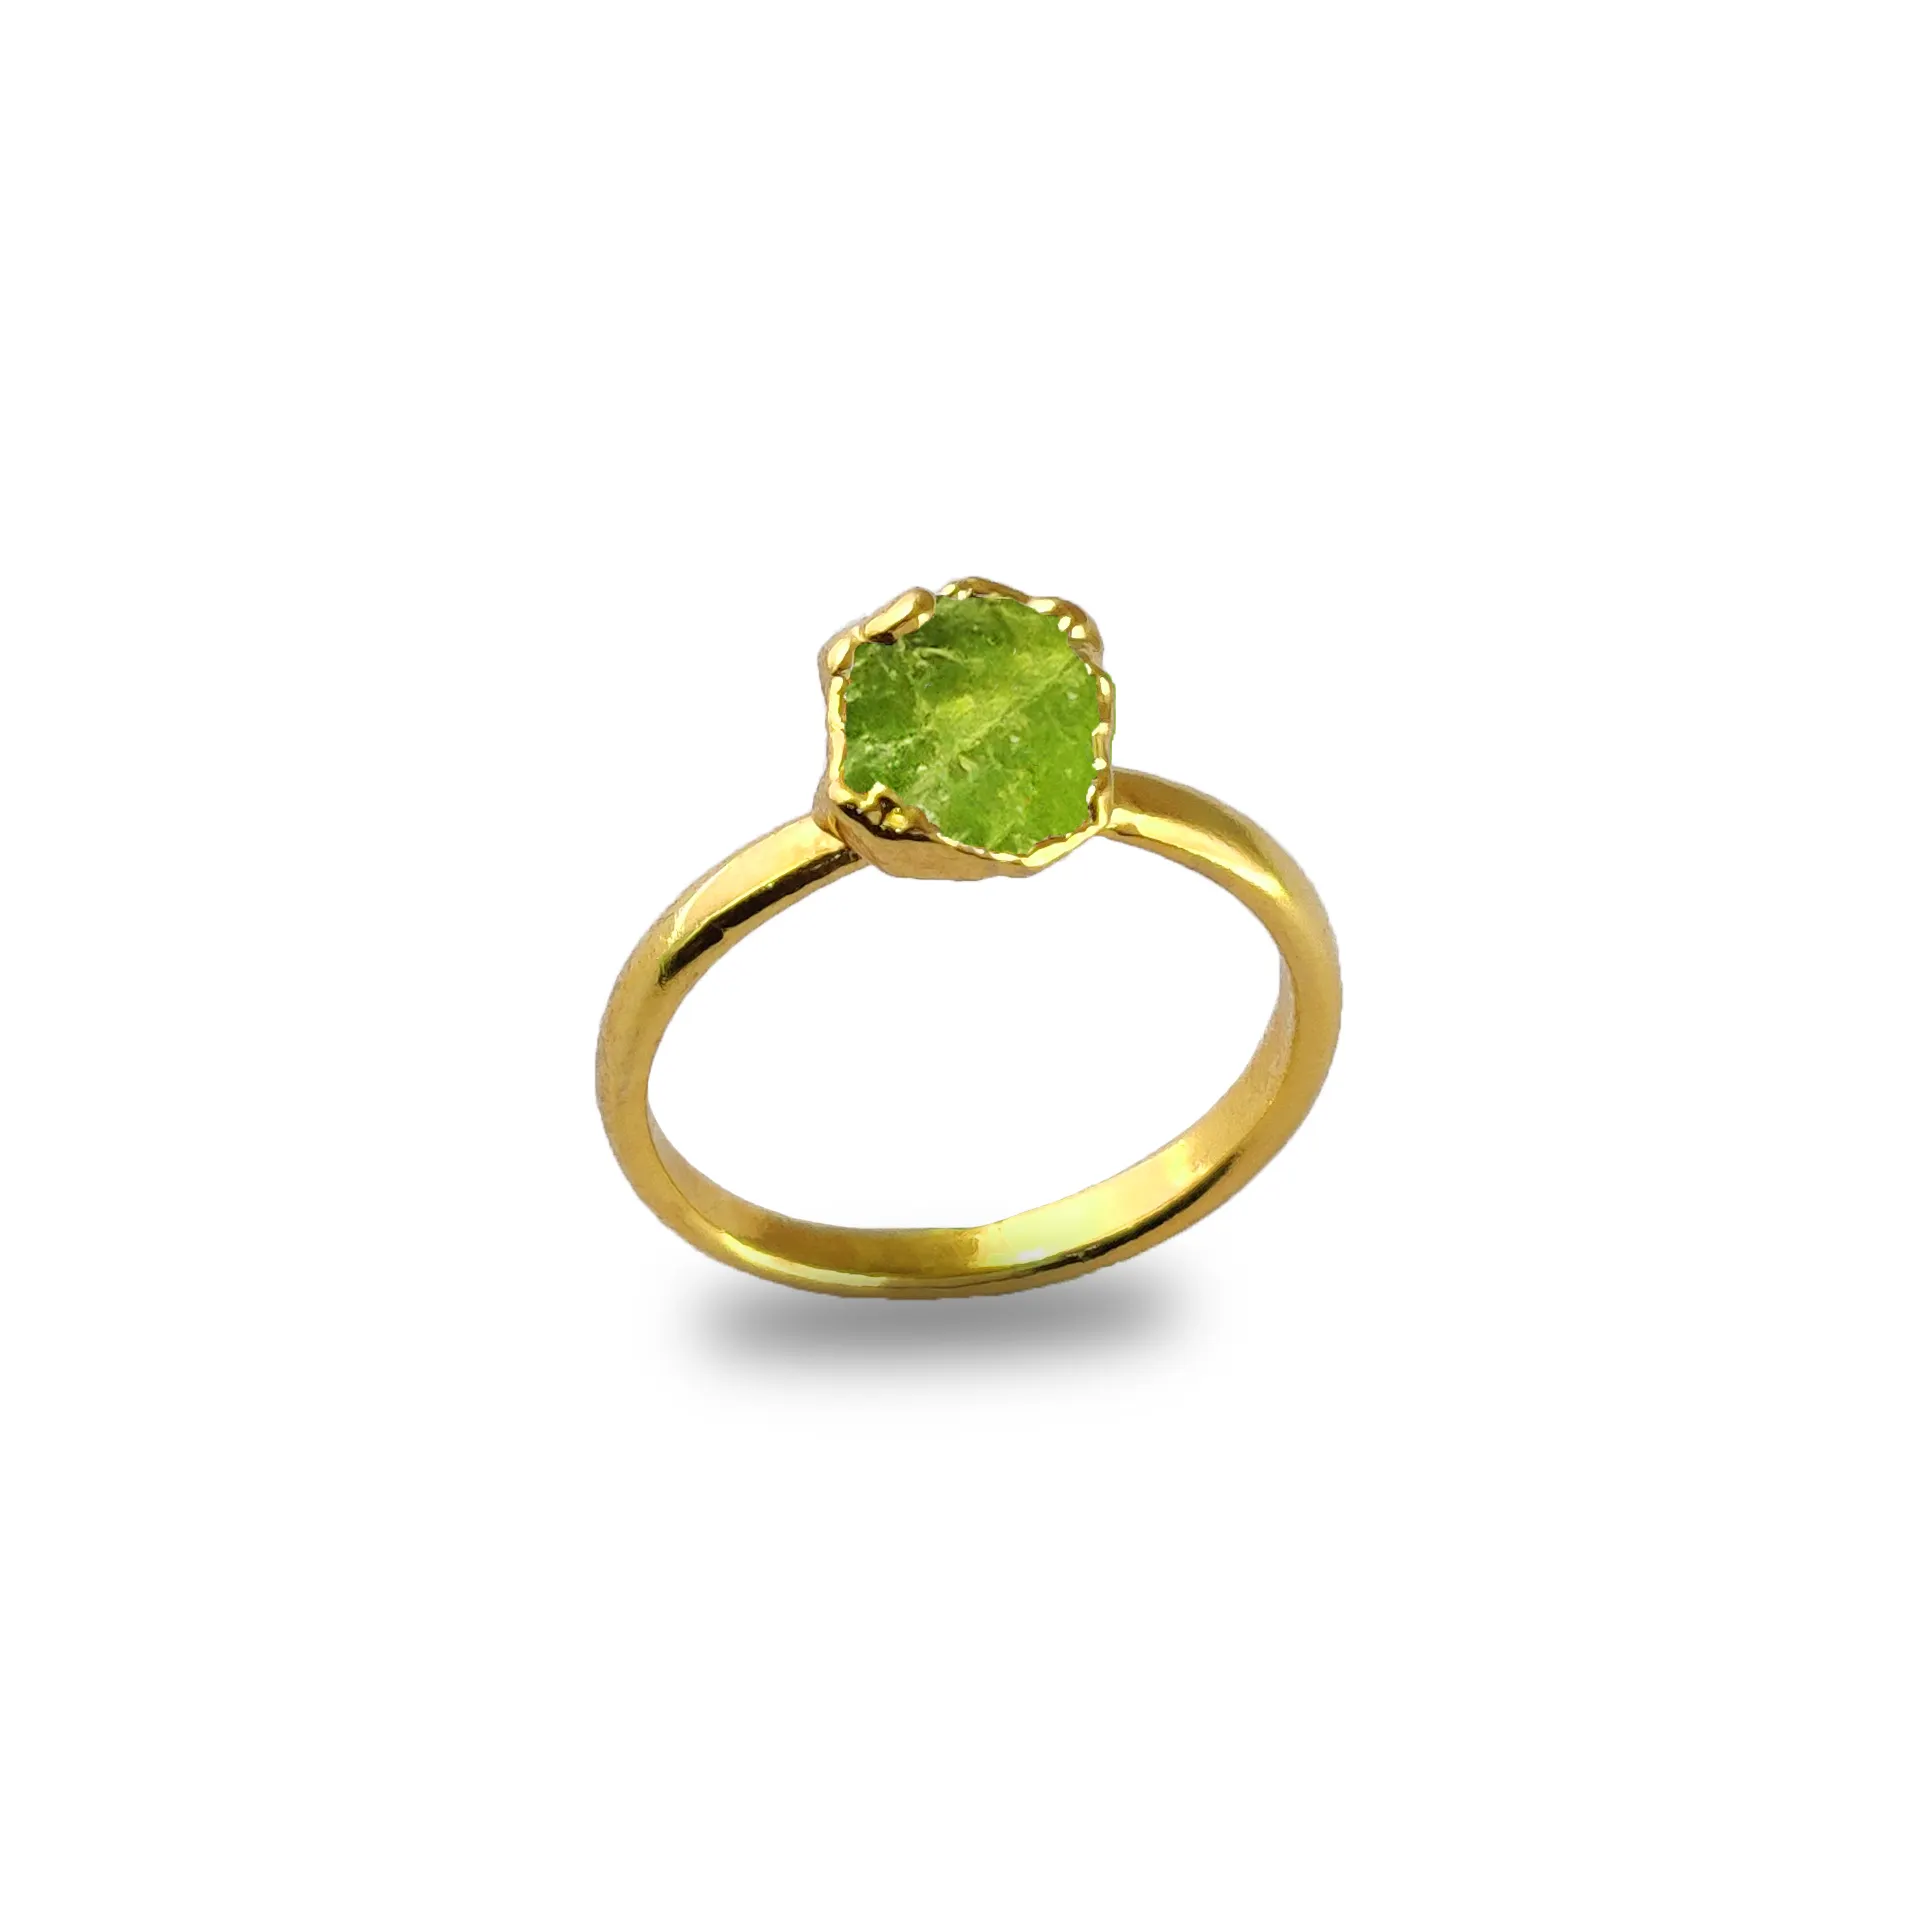 Peridot Ring 925 Sterling Silver Gold Vermeil Rough Birthstone Gold Electroplated Ring Gemstone Silver Raw Peridot Gemstone Ring